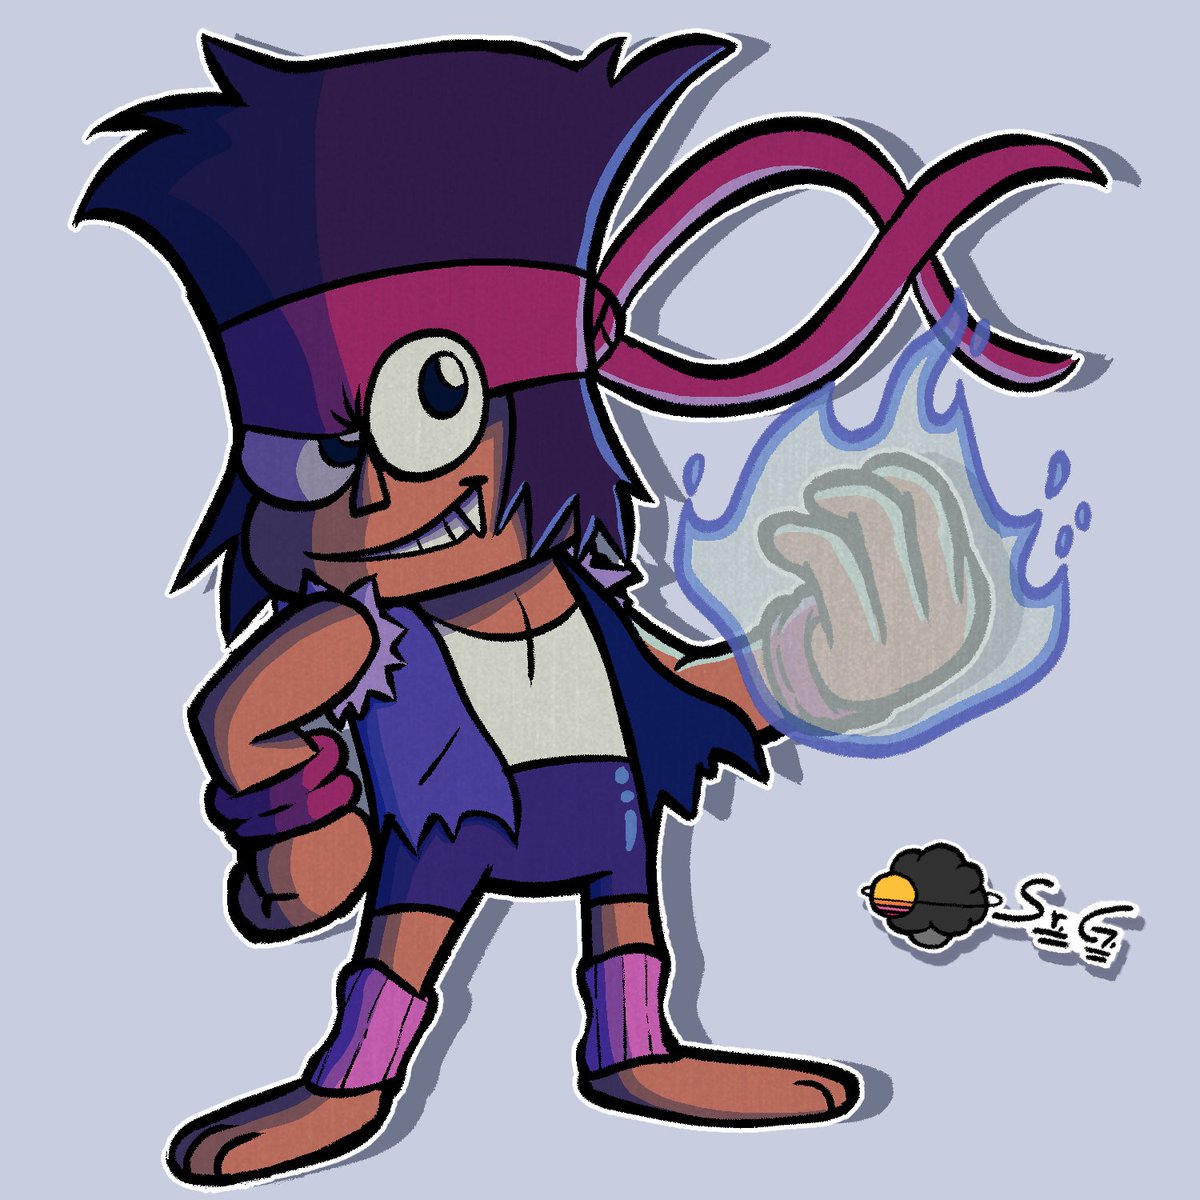 K.O. warmup to break the hiatus. He can have a little aura, as a treat.